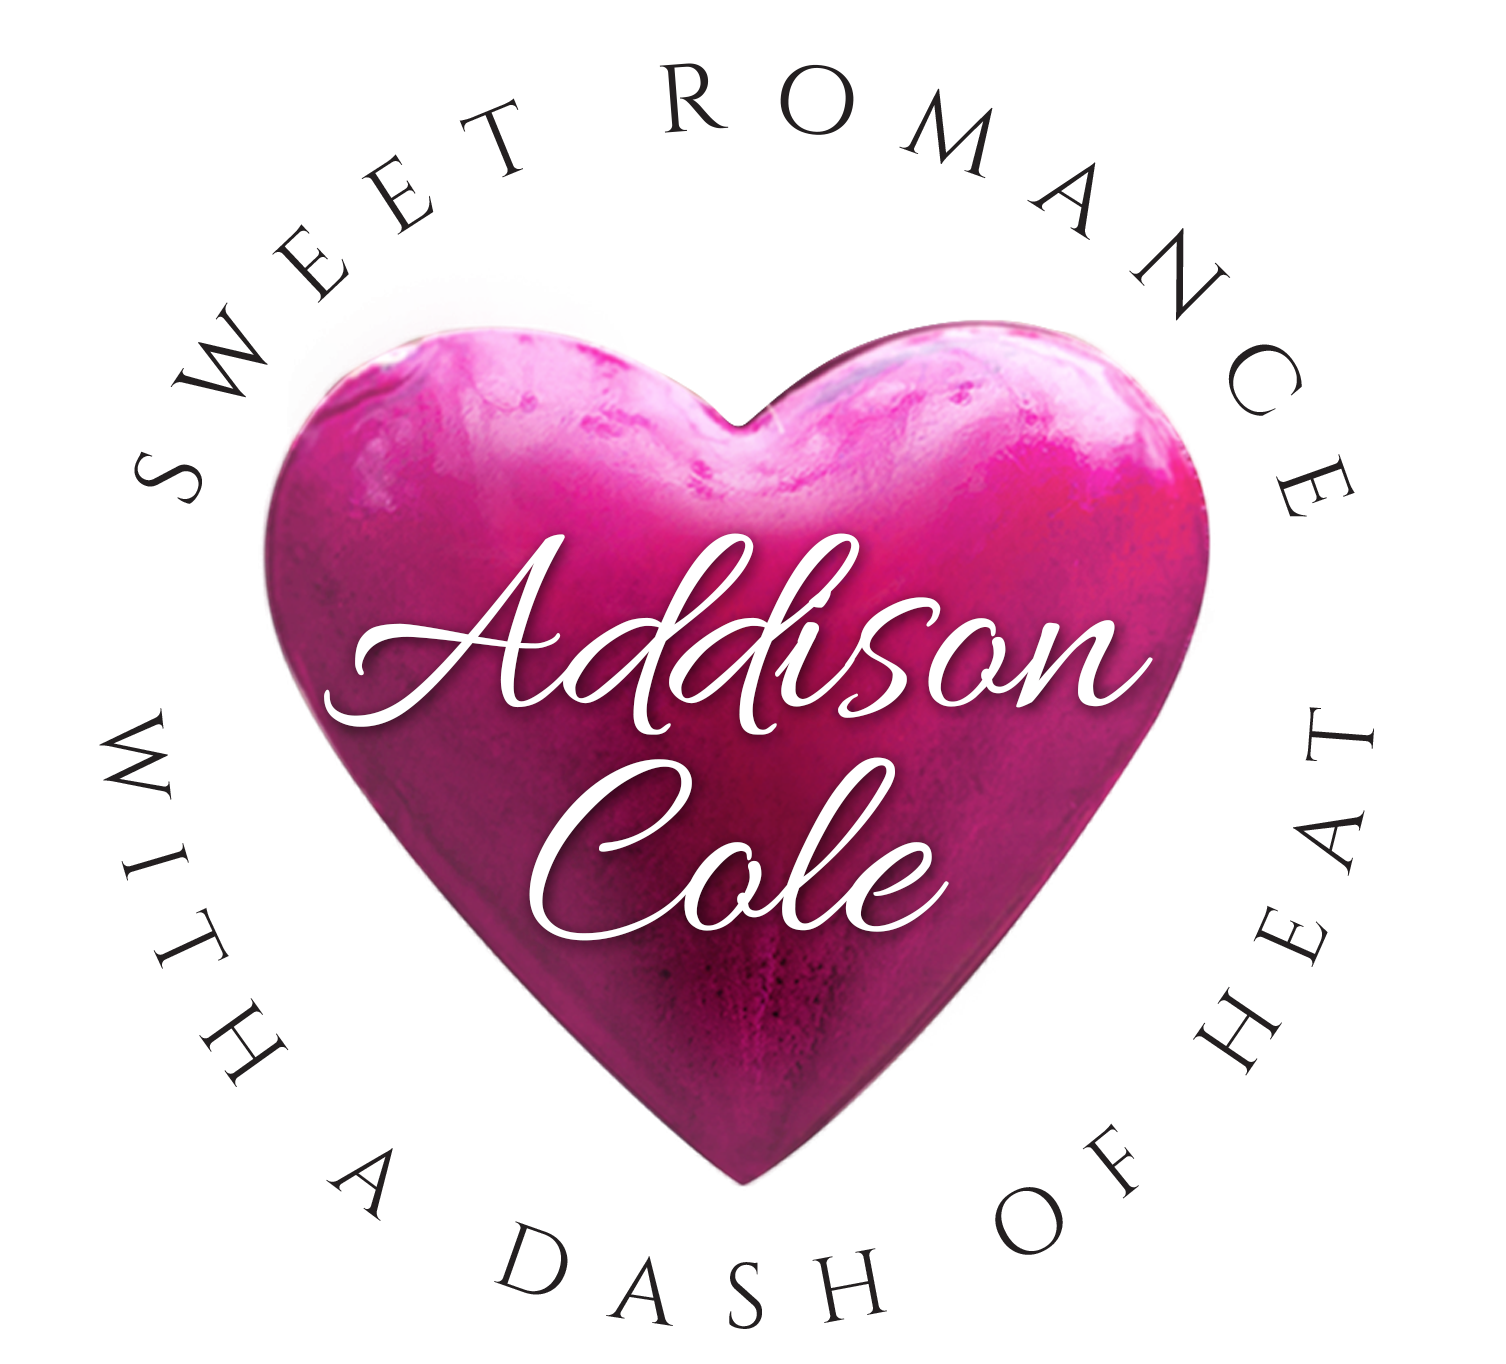 Our Sweet Destiny by Addison Cole - Book Tour